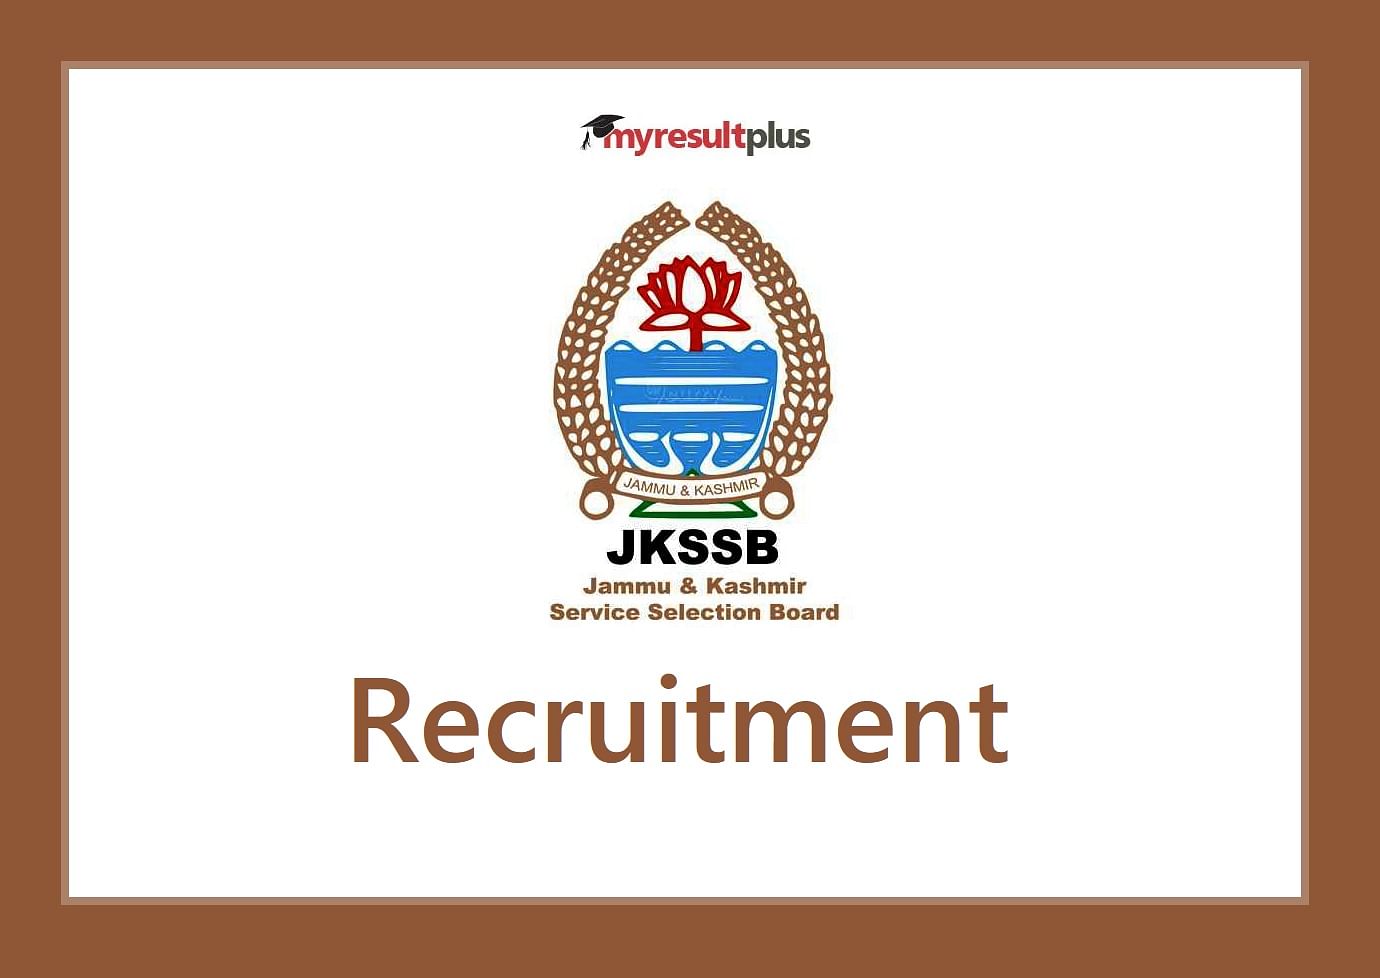 JKSSB recruitment 2022 Posts Notification for Over 700 vacancies, Application Starts from Aug 14